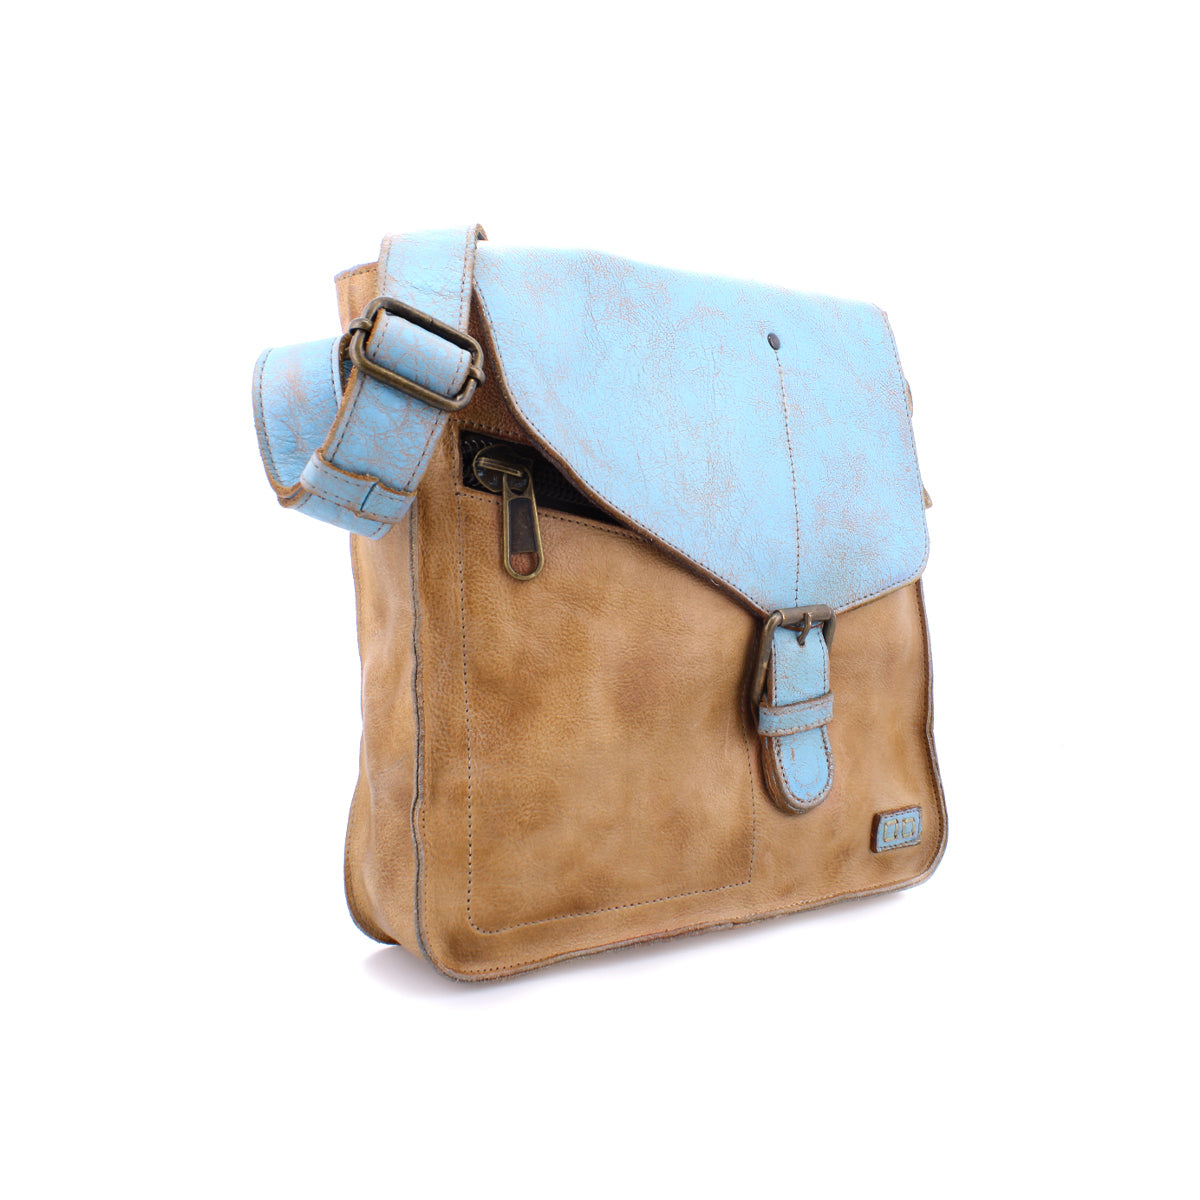 A vintage-inspired masterpiece of a Venice Beach brown leather crossbody bag with a strap by Bed Stu.